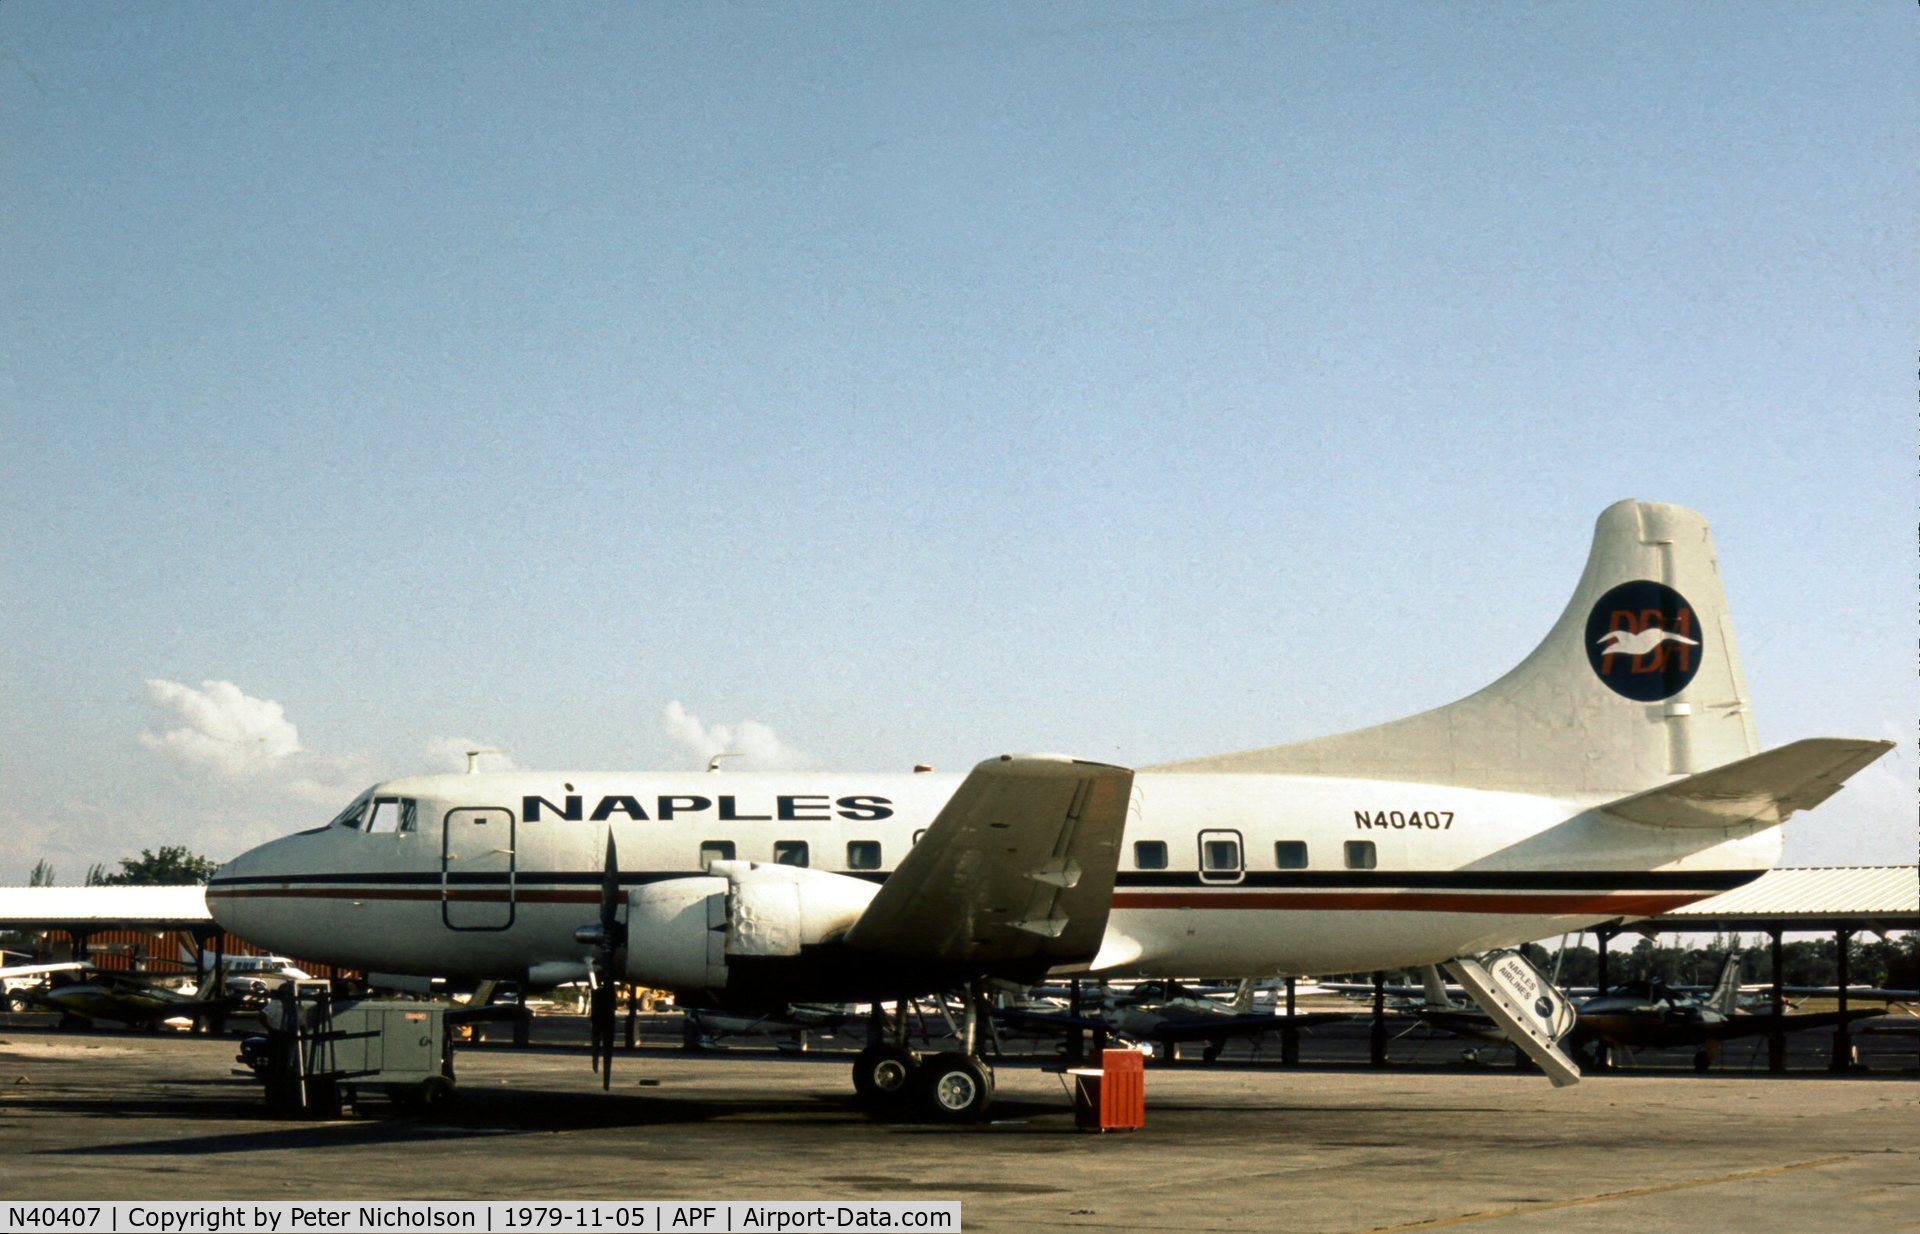 N40407, 1951 Martin 404 C/N 14107, Martin 404 of Naples Airlines division of Provincetown-Boston Airlines as seen at Naples in November 1979.